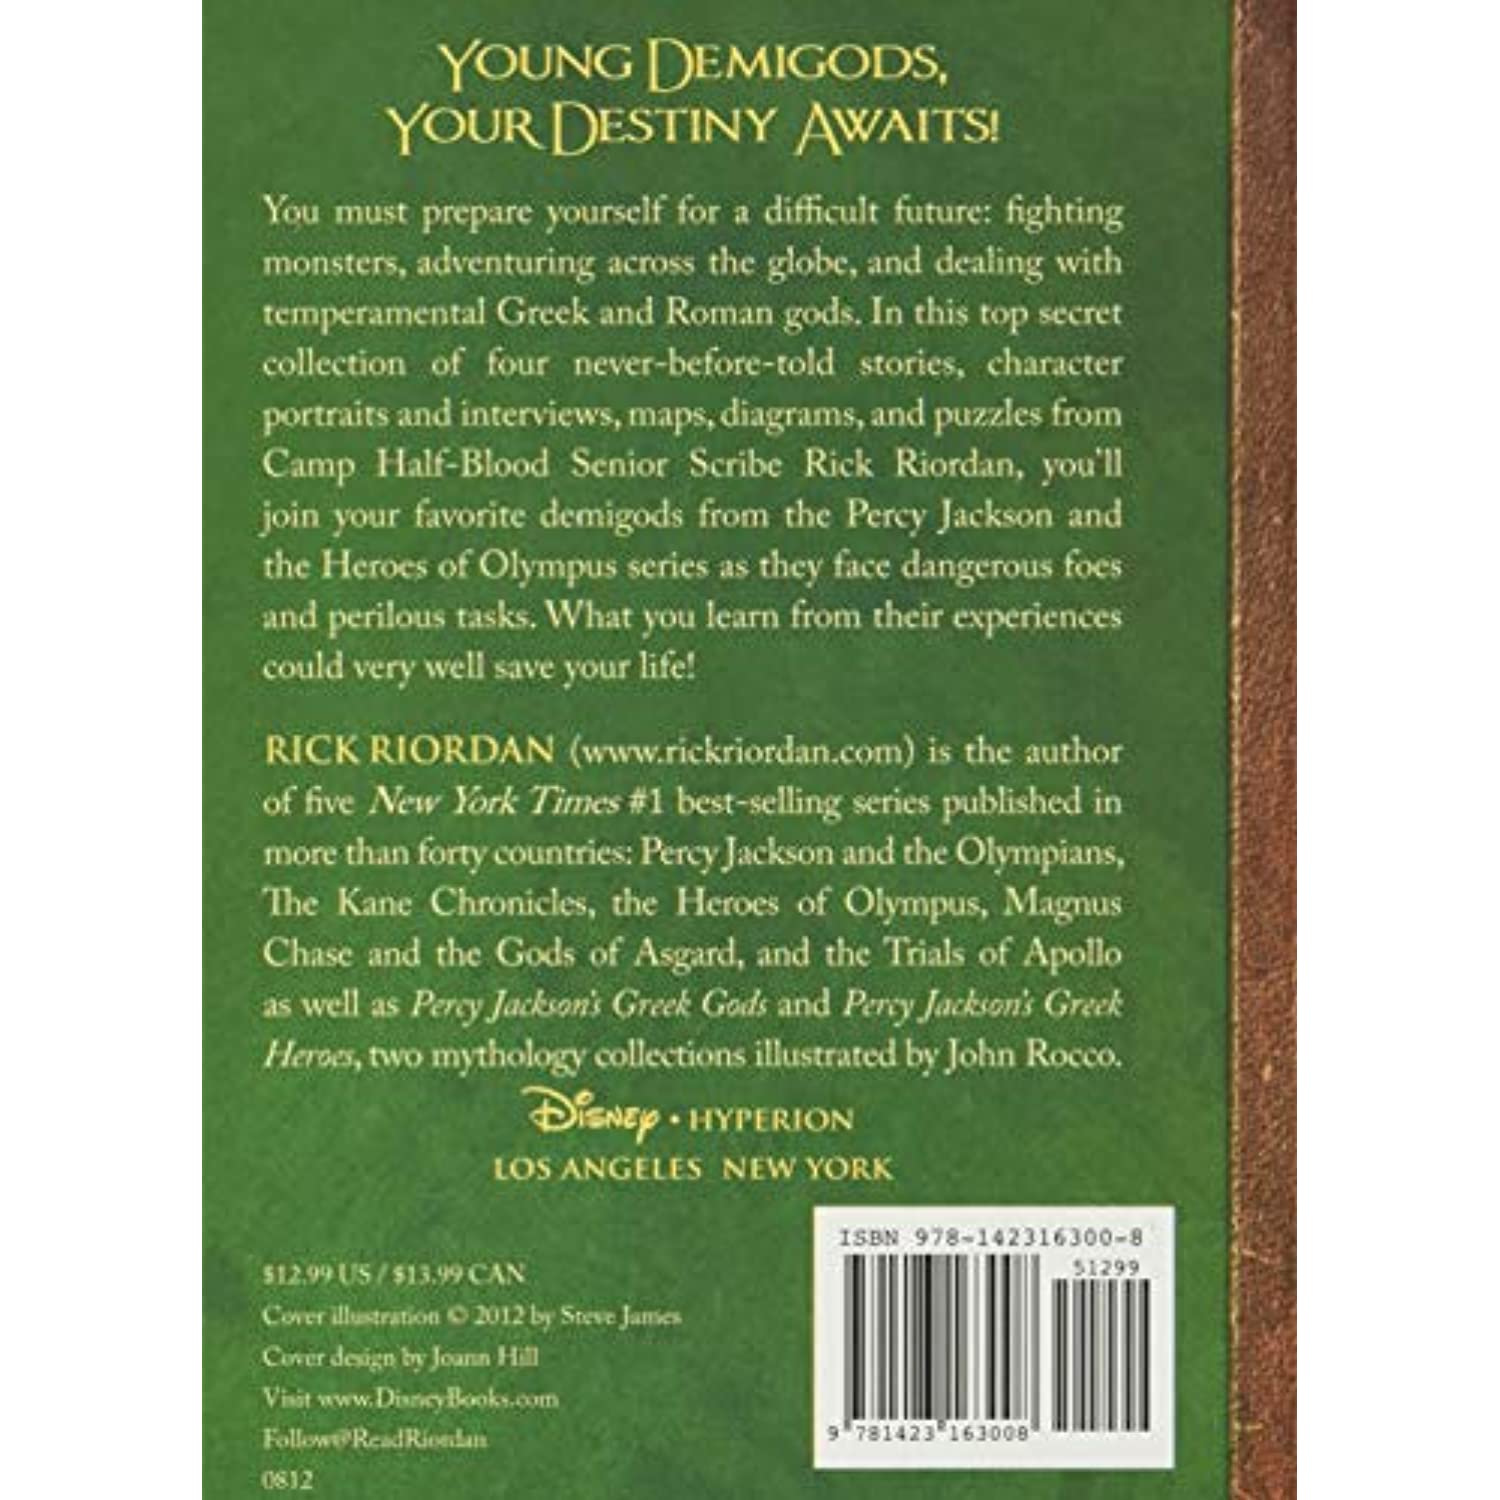 The Heroes of Olympus: The Heroes of Olympus: The Demigod Diaries-The Heroes of Olympus, Book 2 (Series #2) (Hardcover) - image 2 of 5